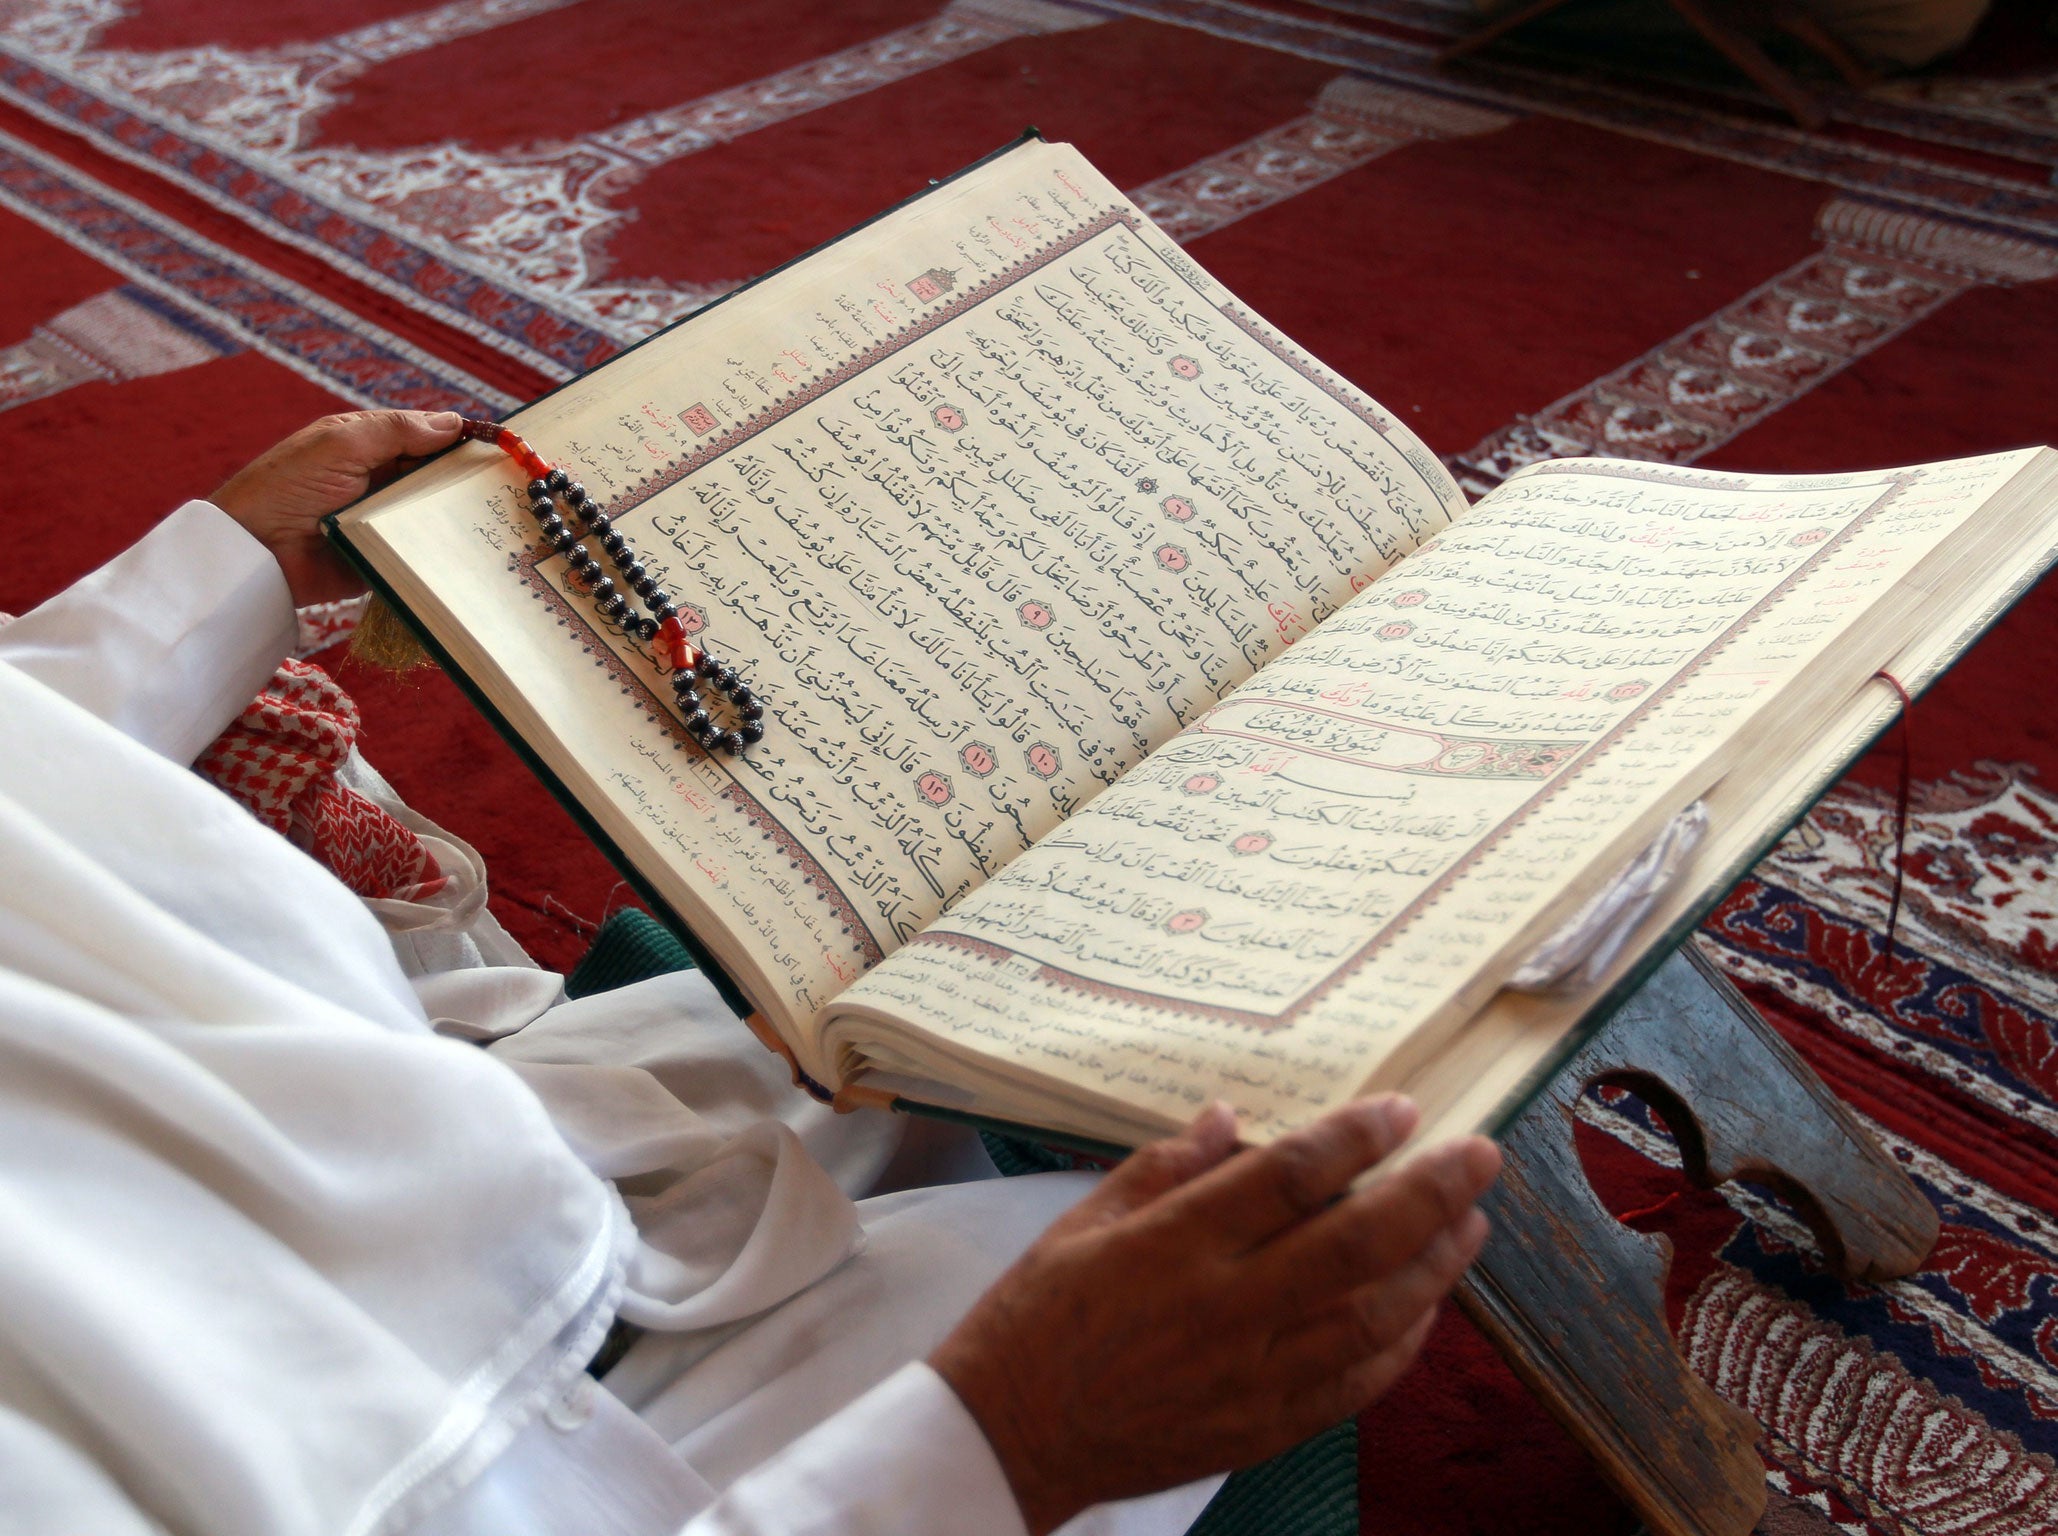 A man reads a Koran in a mosque in Sanaa. At least 20 people have died in twin blasts in the capital.